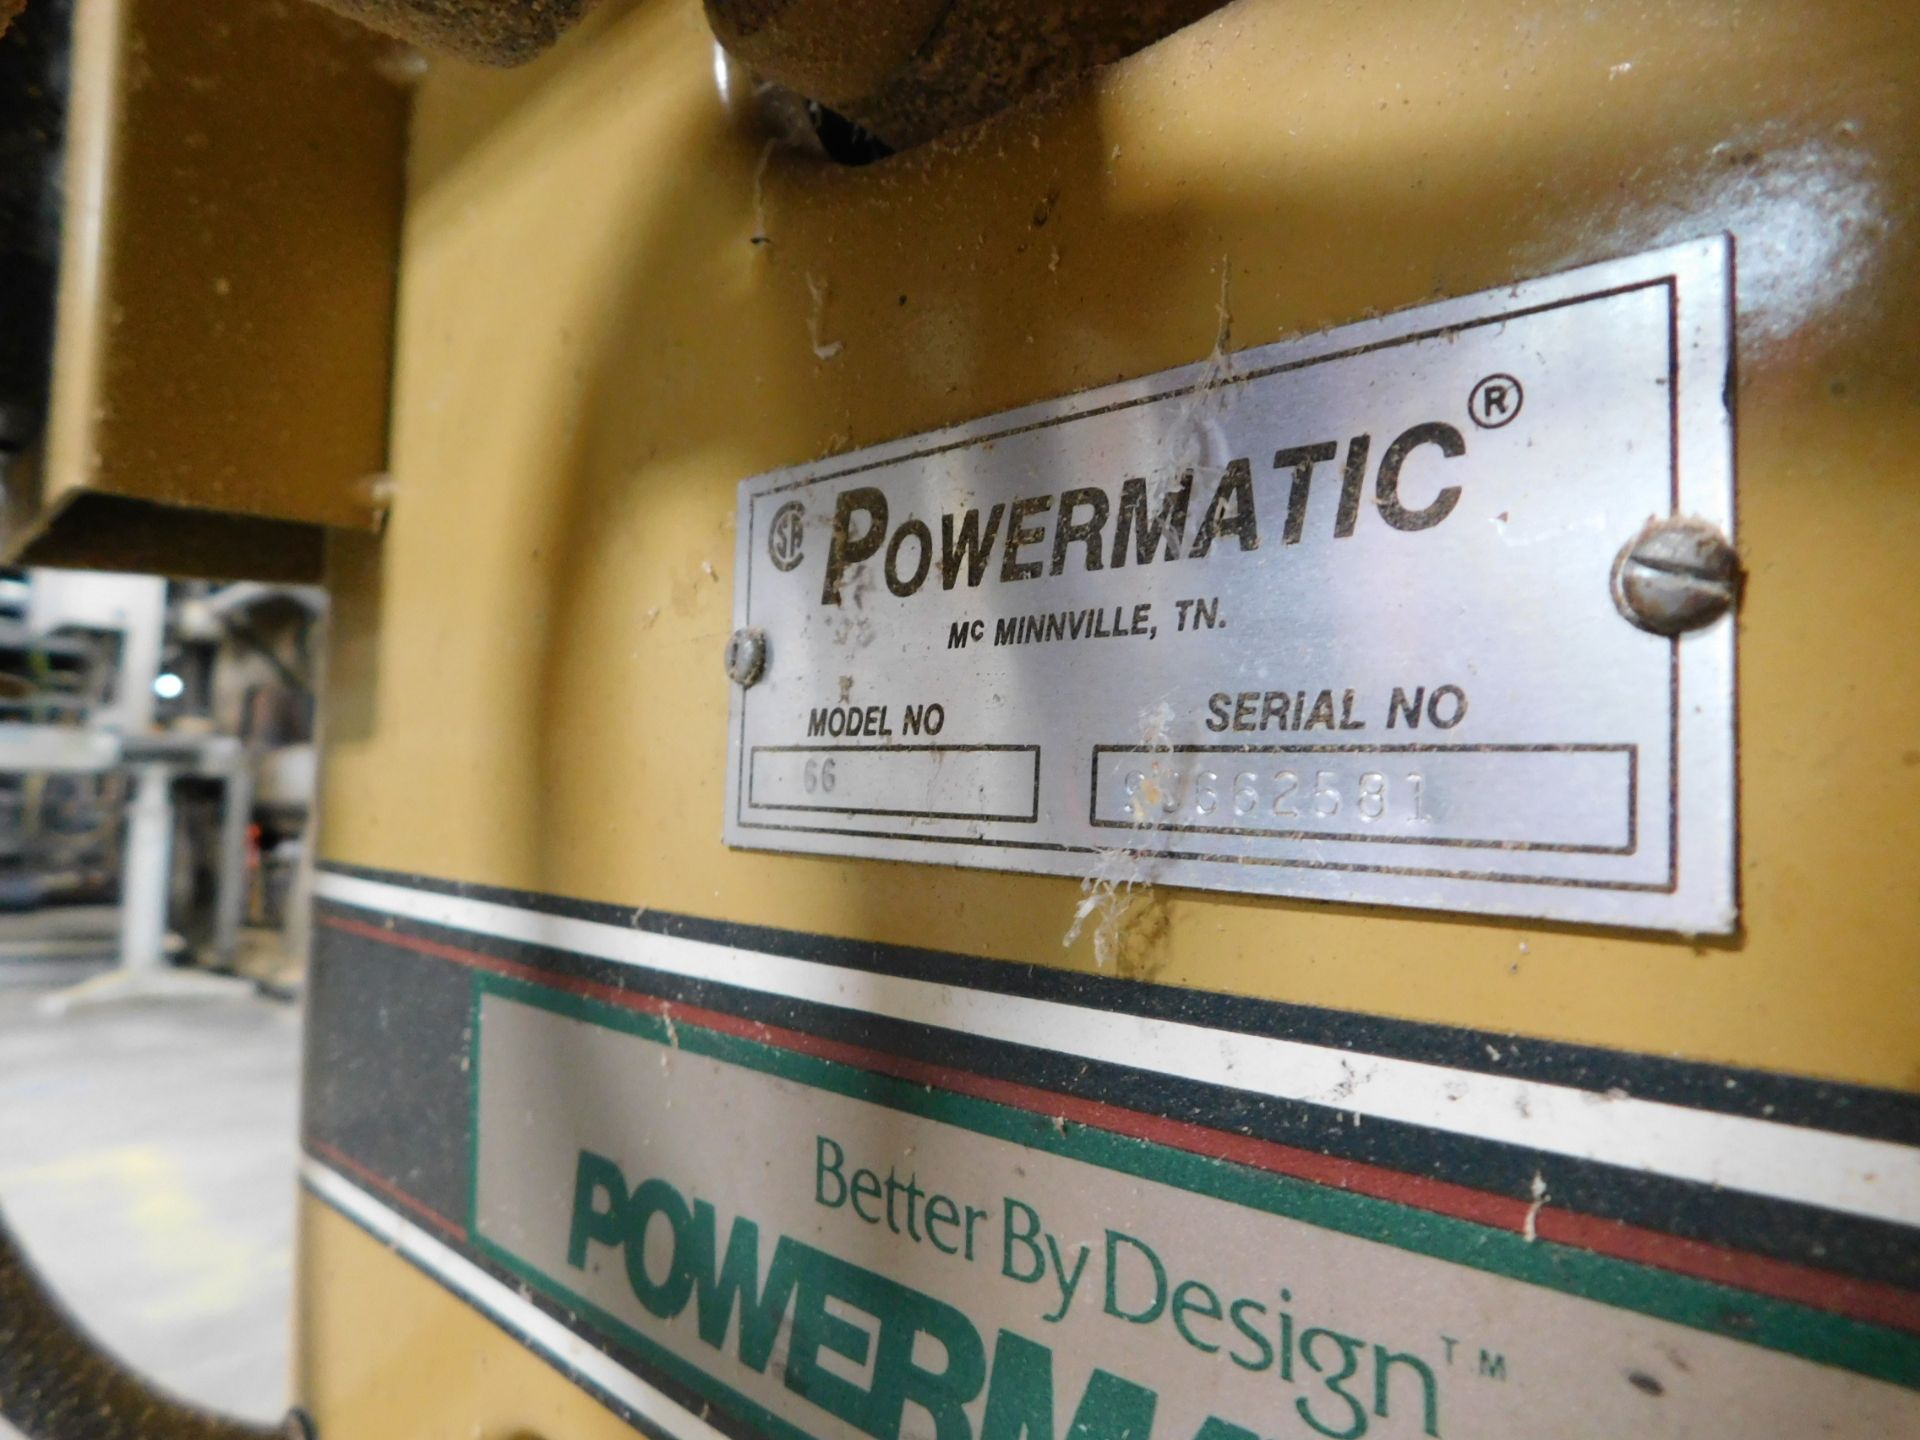 Powermatic Model 66, 10" Table Saw, s/n 93662581, with Fence and Miter Gauge, Loading Fee $100.00 - Image 5 of 6